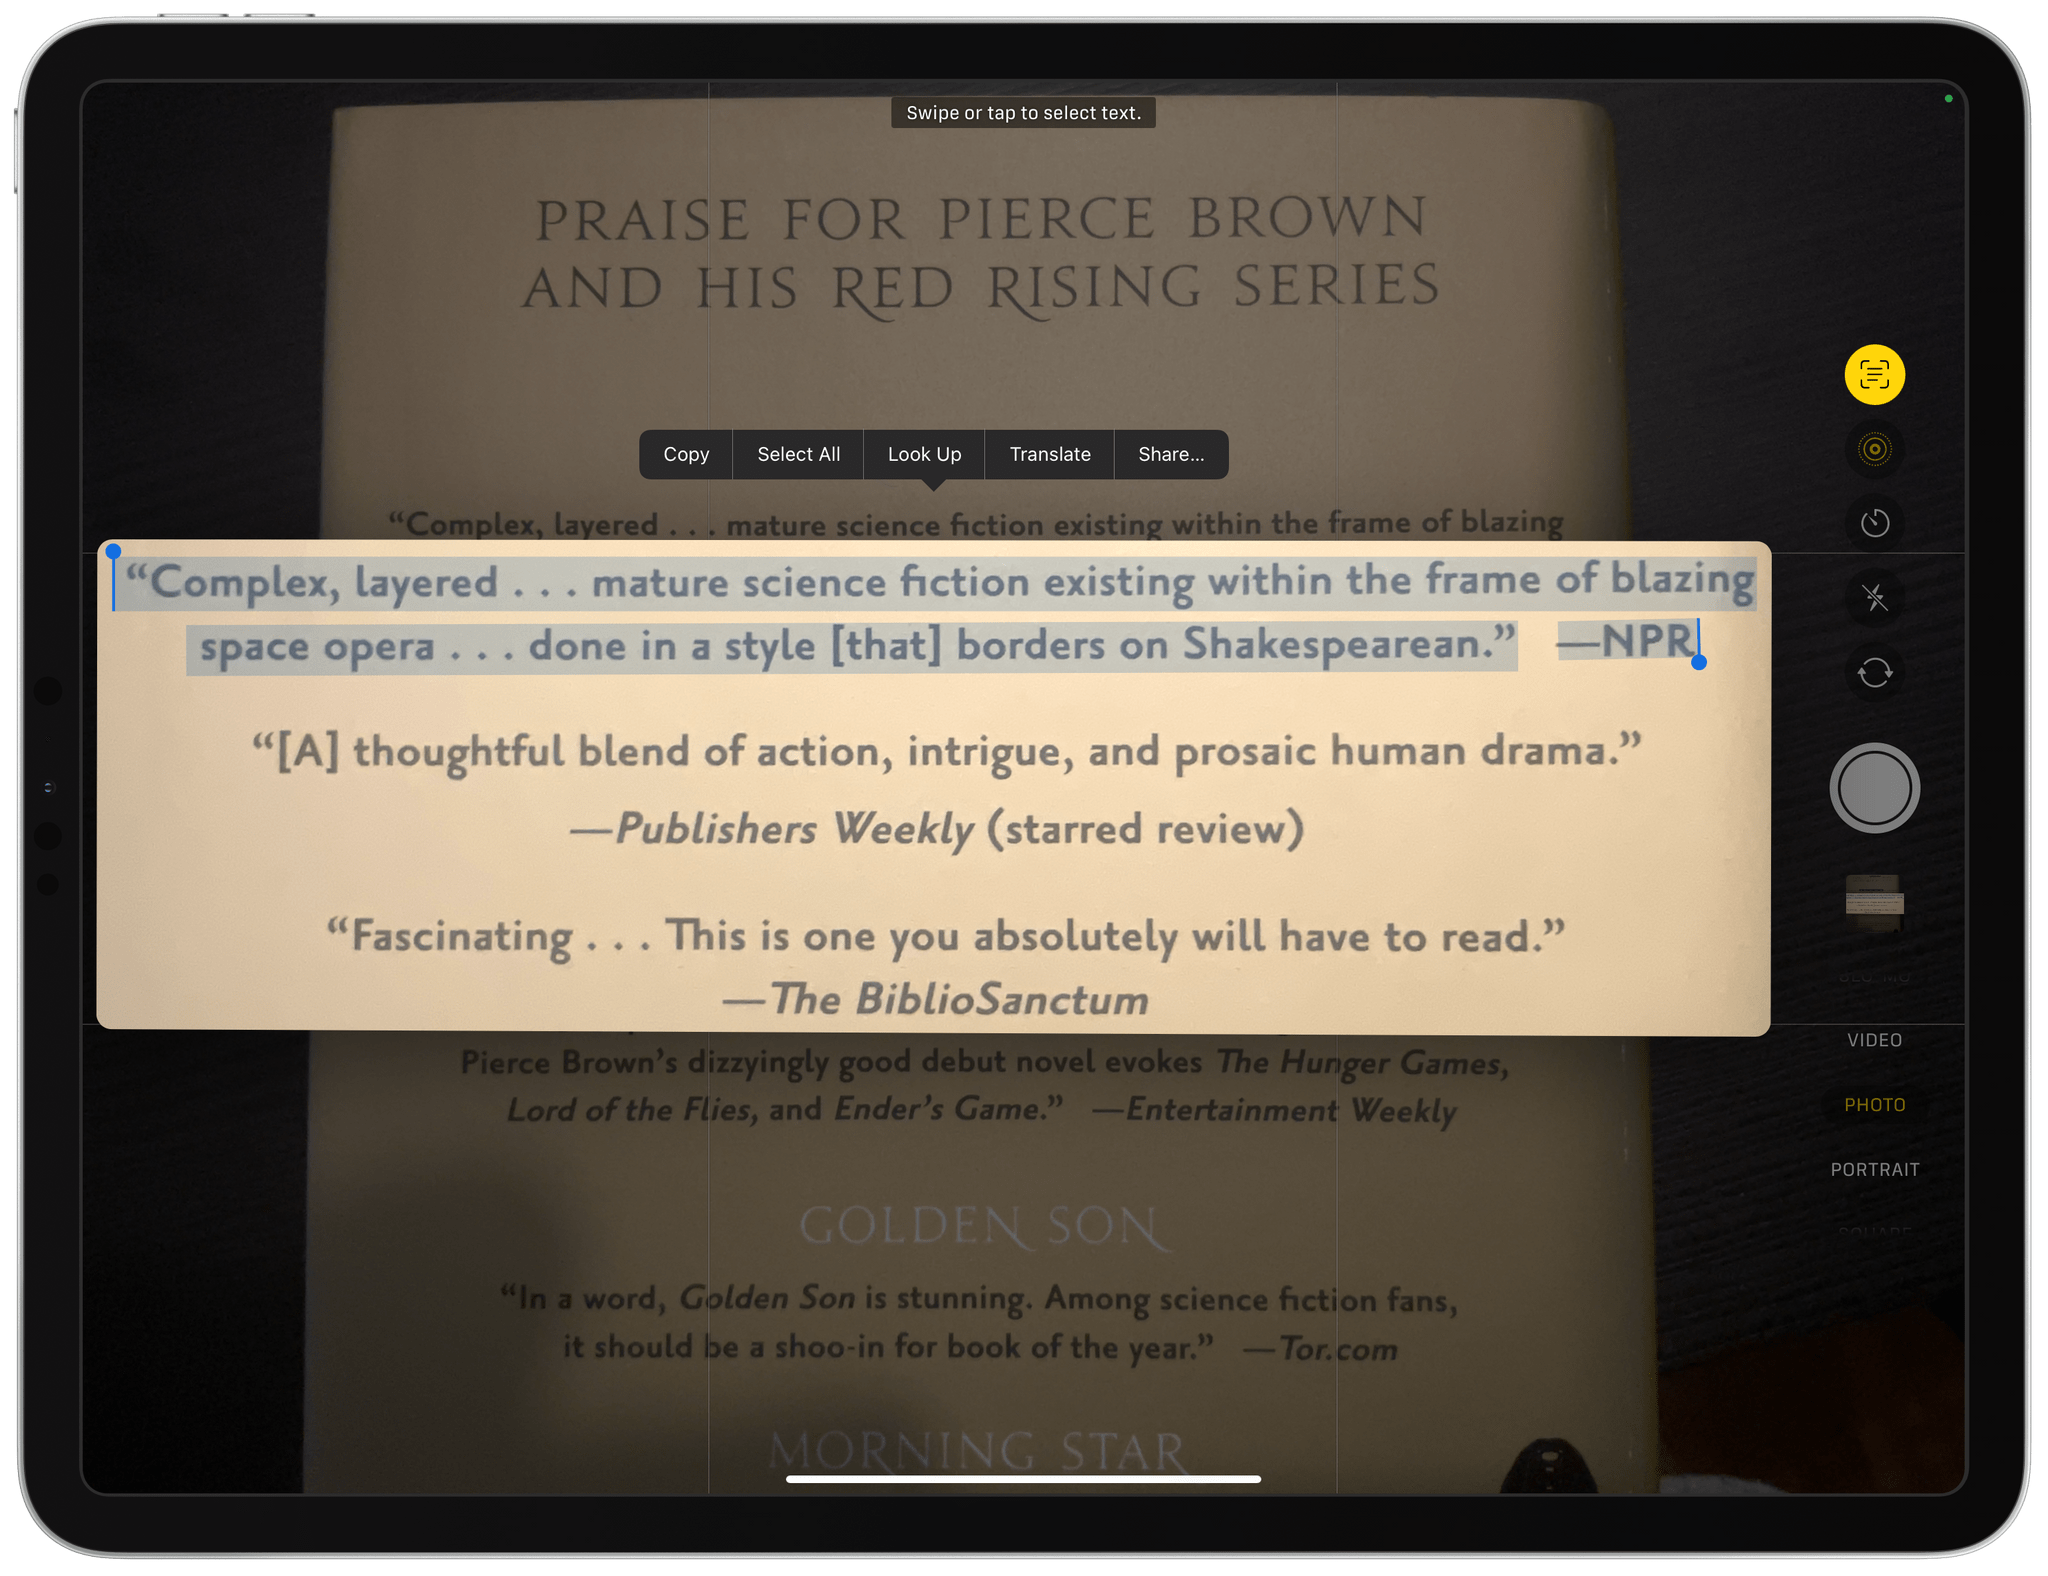 Live Text in the iPad's Camera app.